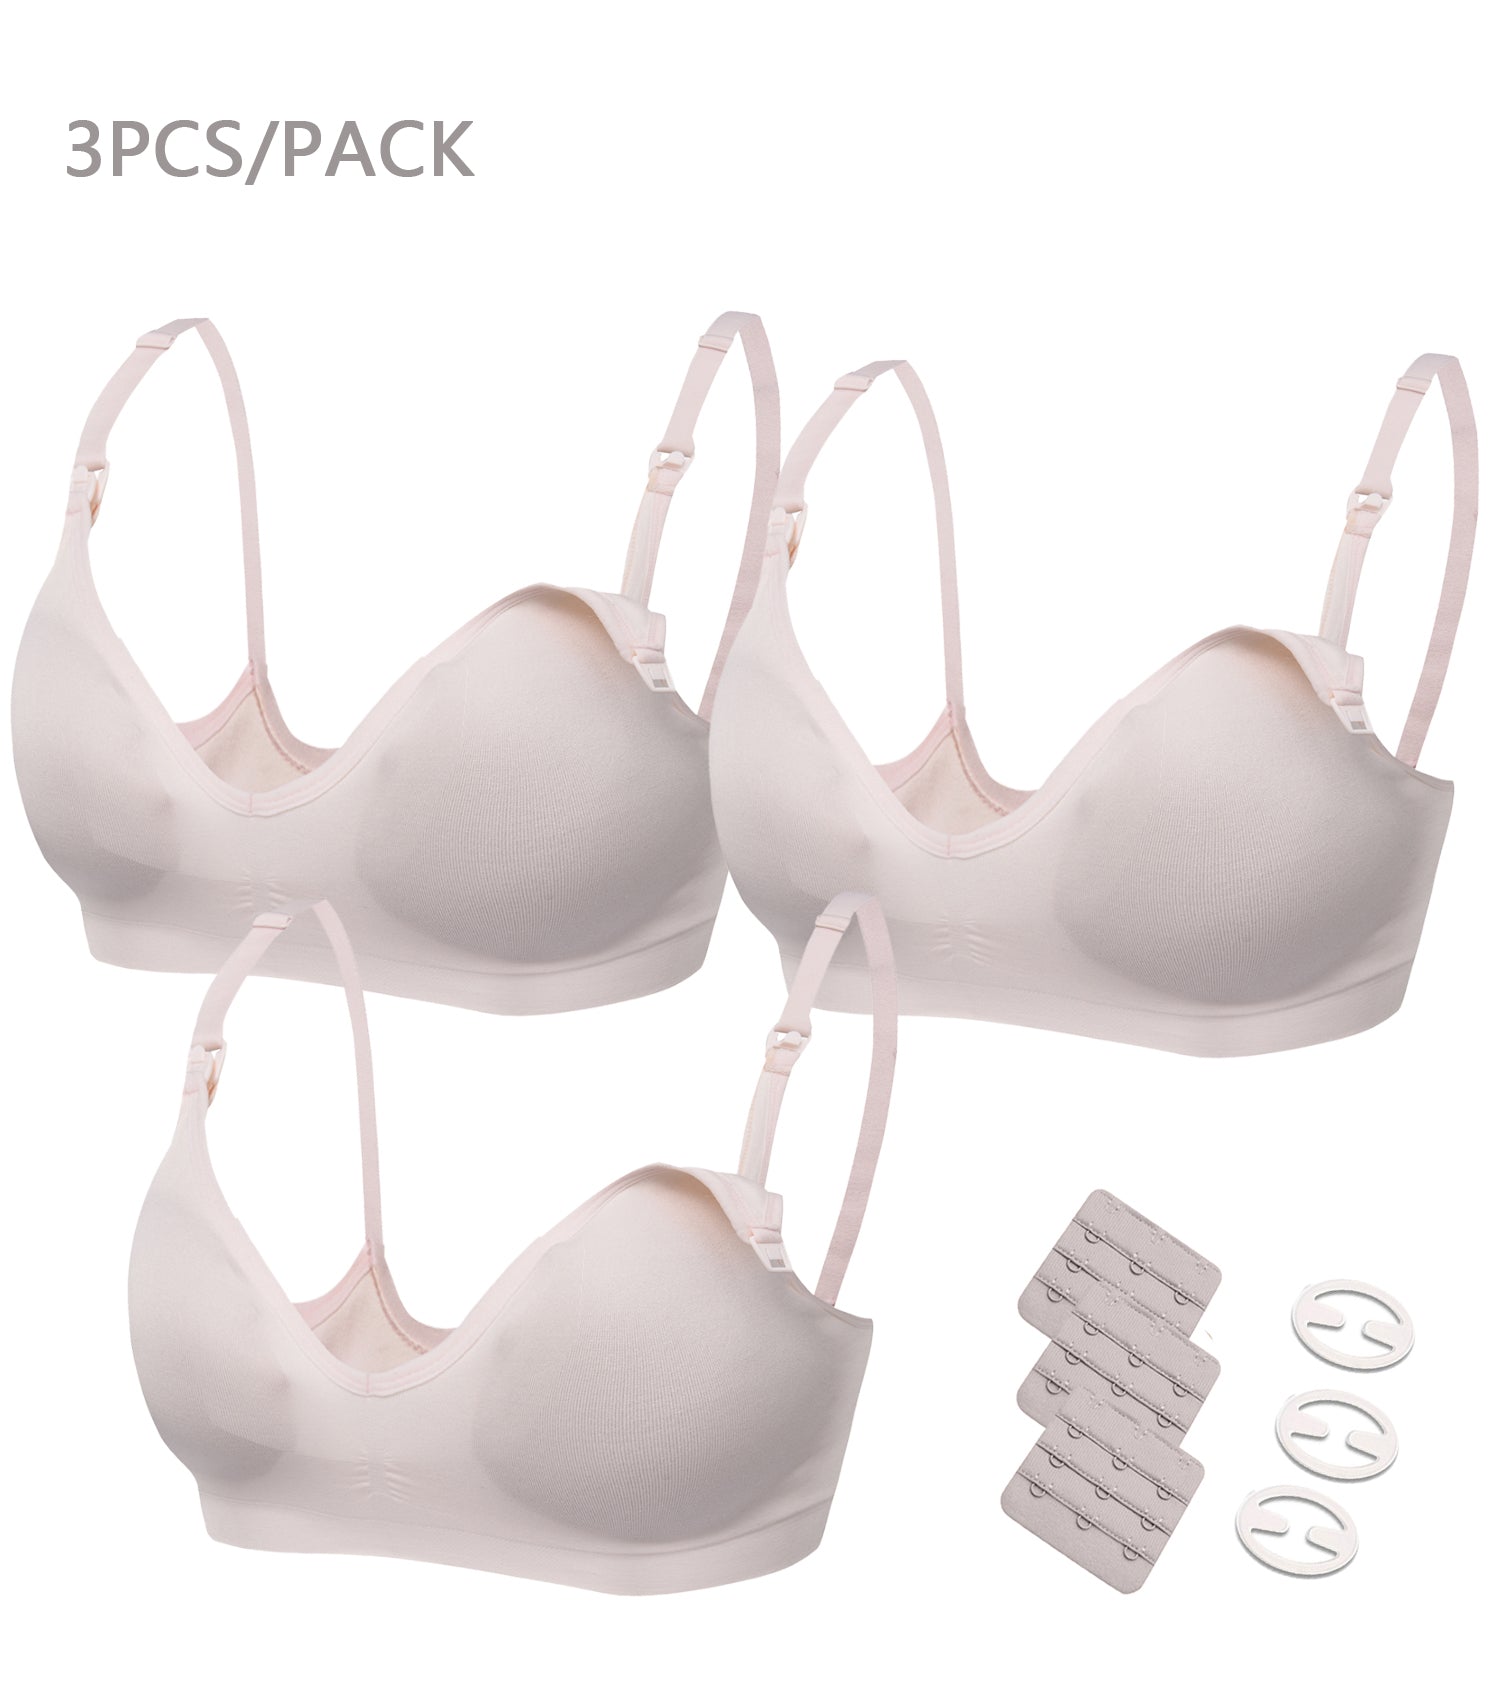 42B- Maternity/Nursing Bras Non-Wired, Non-Padded with free Bra